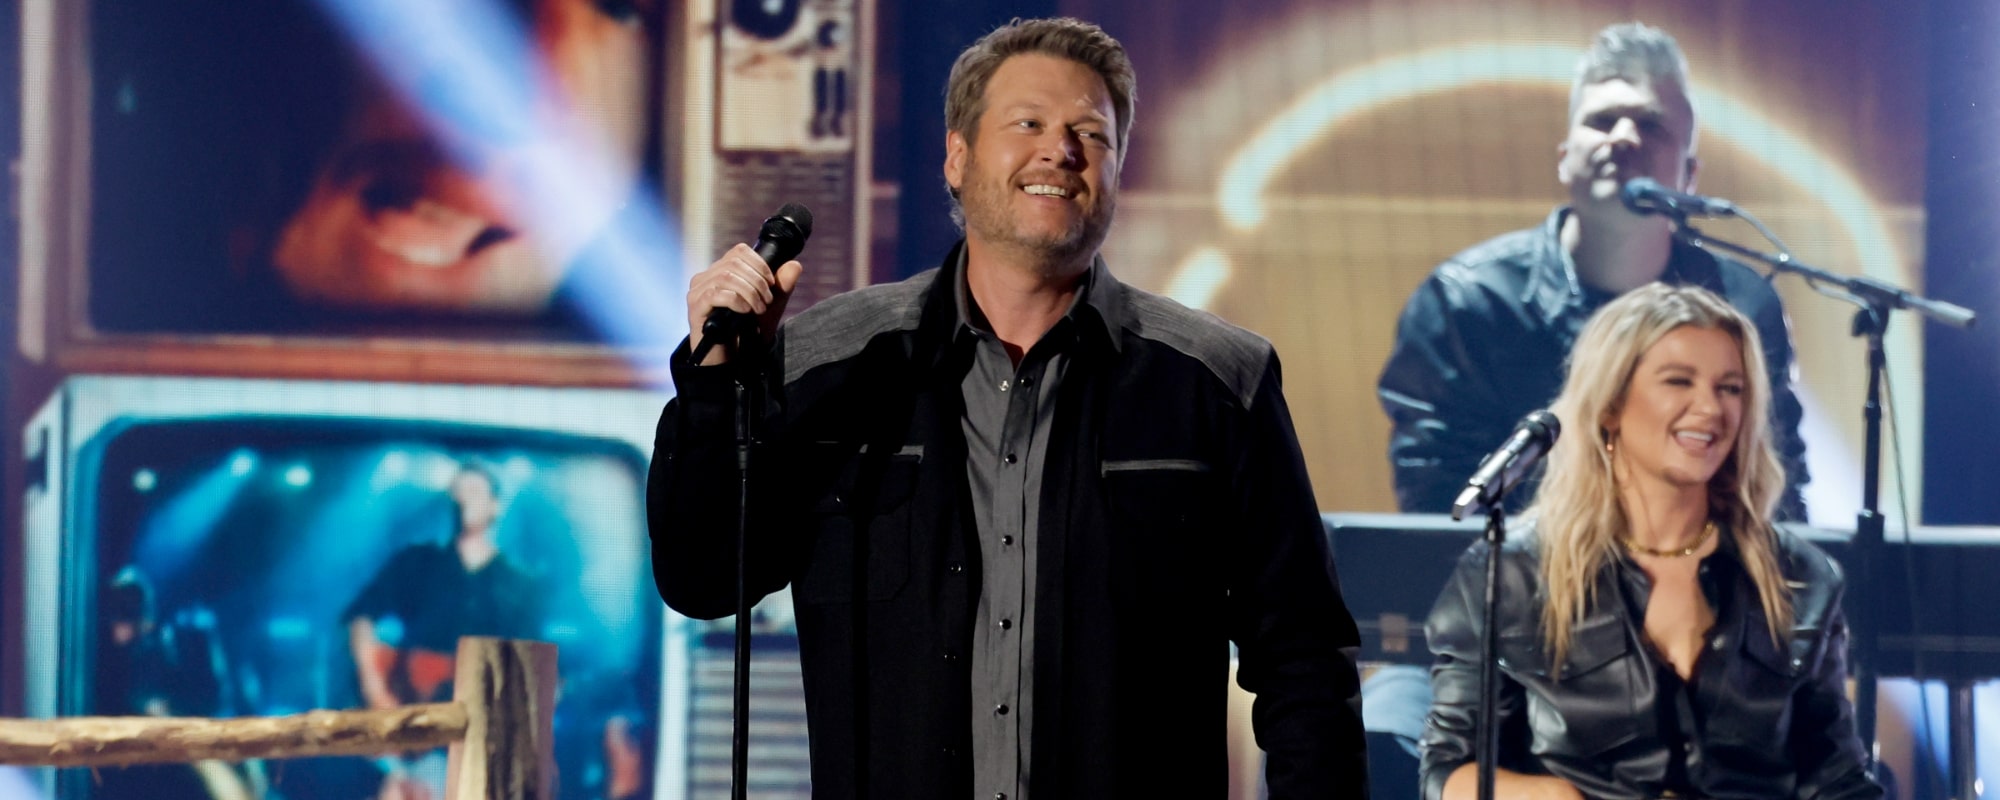 Watch Blake Shelton Laugh as Nikki Glaser Turns ‘Barmageddon’ into a Comedy of Errors in New Clip